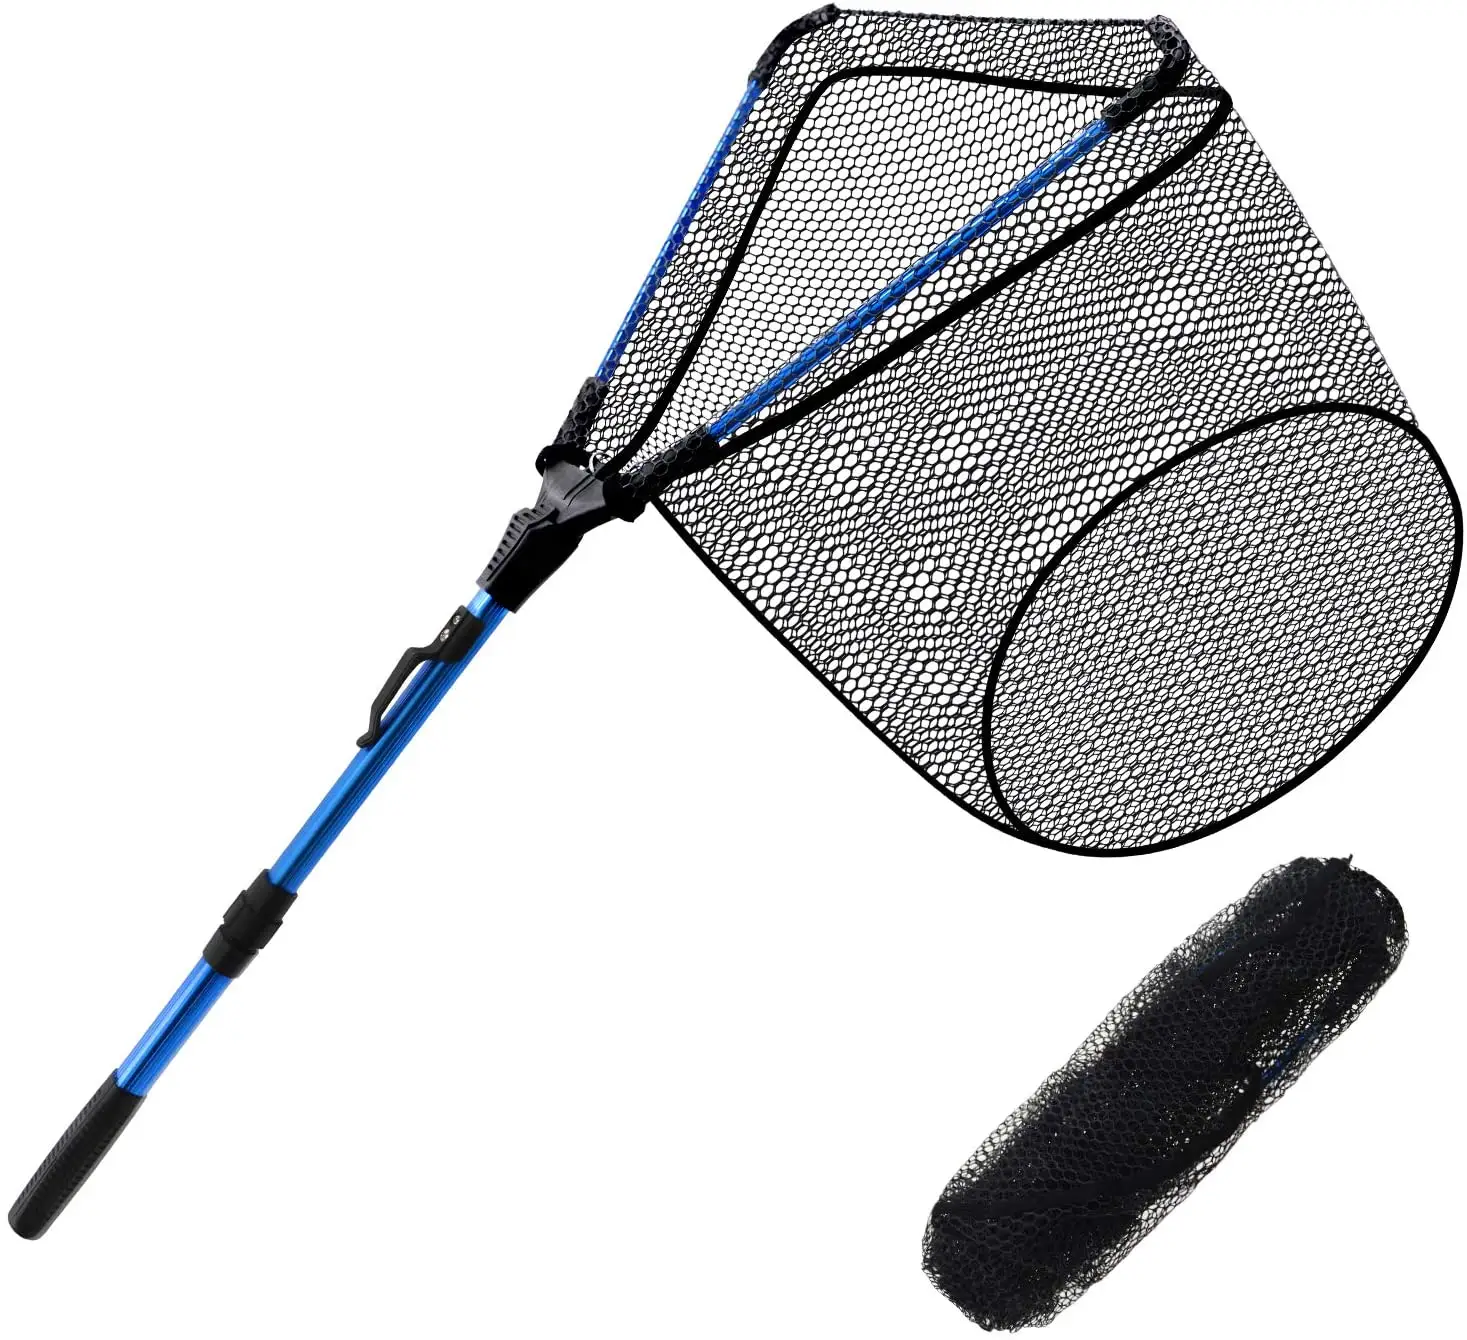 Hot Sell Foldable &Retractable Fishing Landing Net Classical Triangular Large Fishing Net For Freshwater& Saltwater